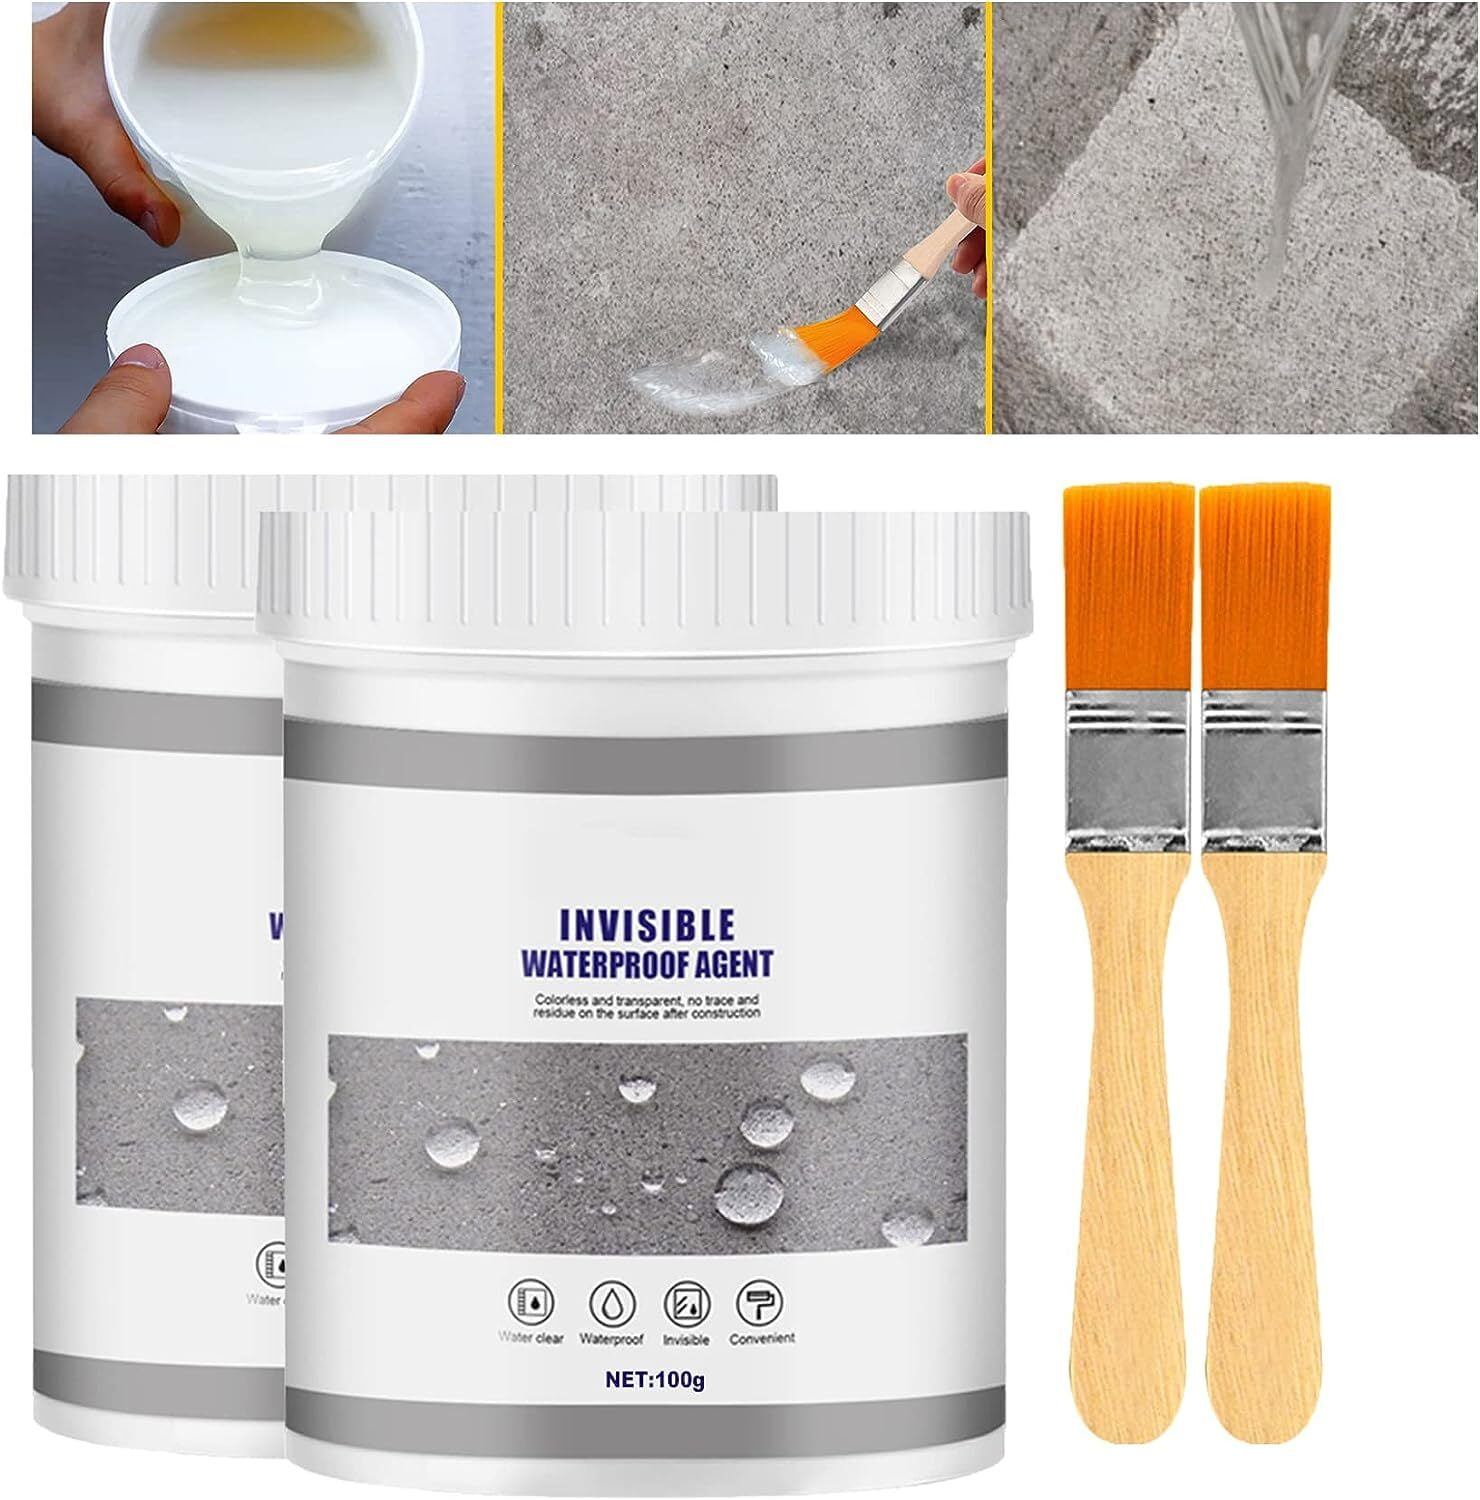 Clear Silicone Sealant Waterproof, Invisible Waterproof Sealant, Clear  Silicone Sealant Waterproof, Repair Leaks Anywhere In Seconds (100g,2pcs) 